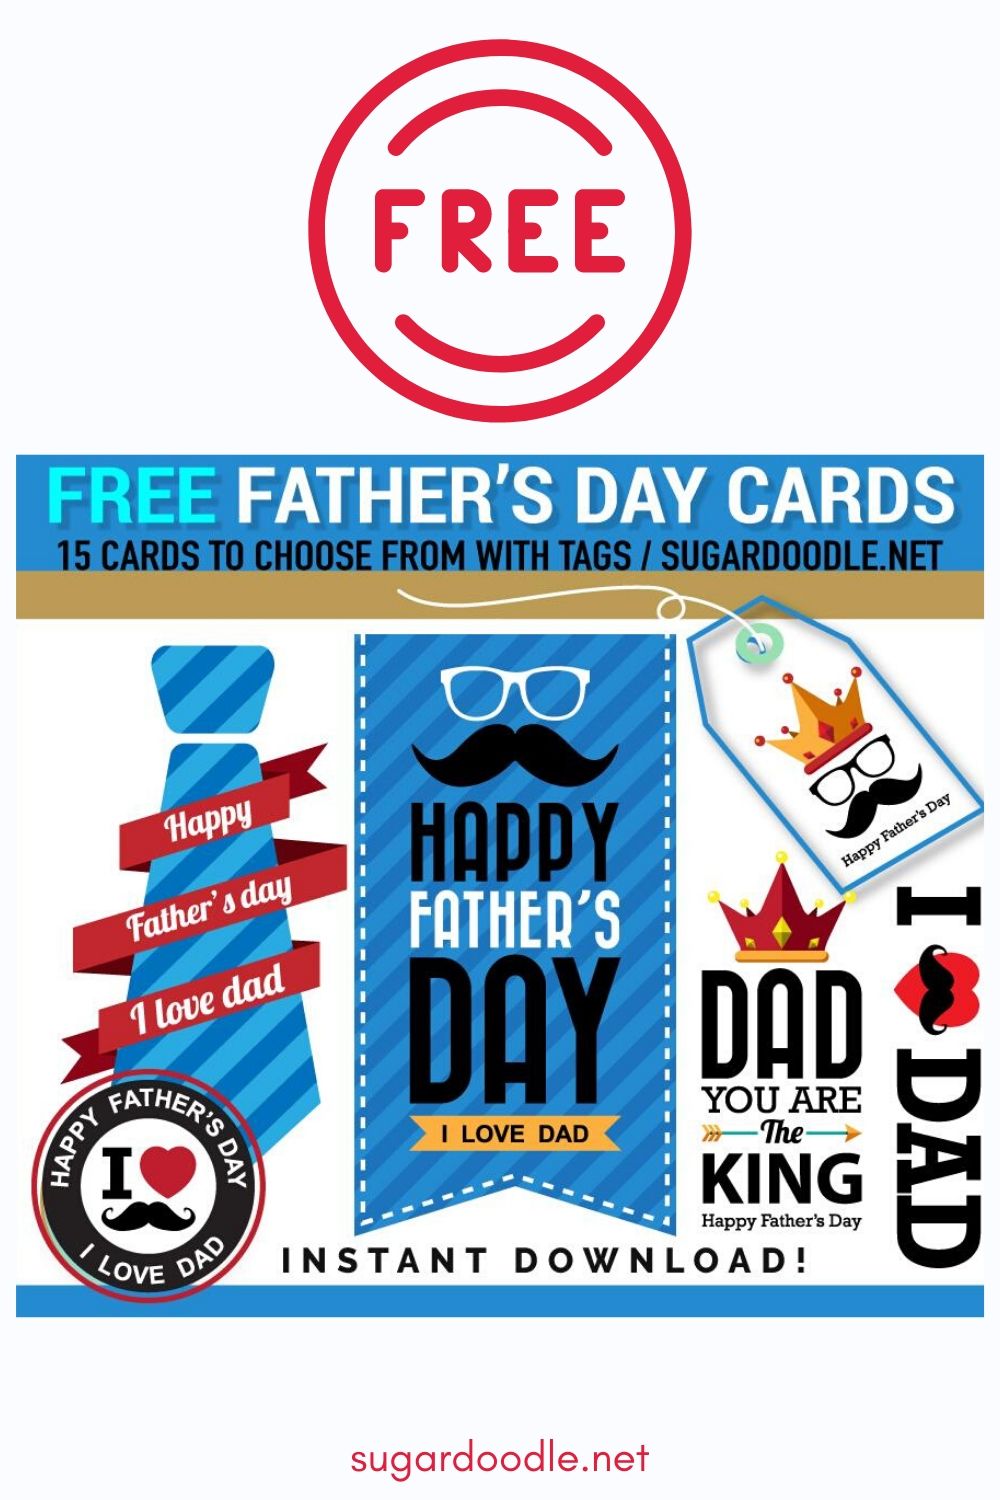 We have LOTS of FREE Father's Day cards and gift tags to choose from. Just download and print. #fathersday #fathers #cards #dad